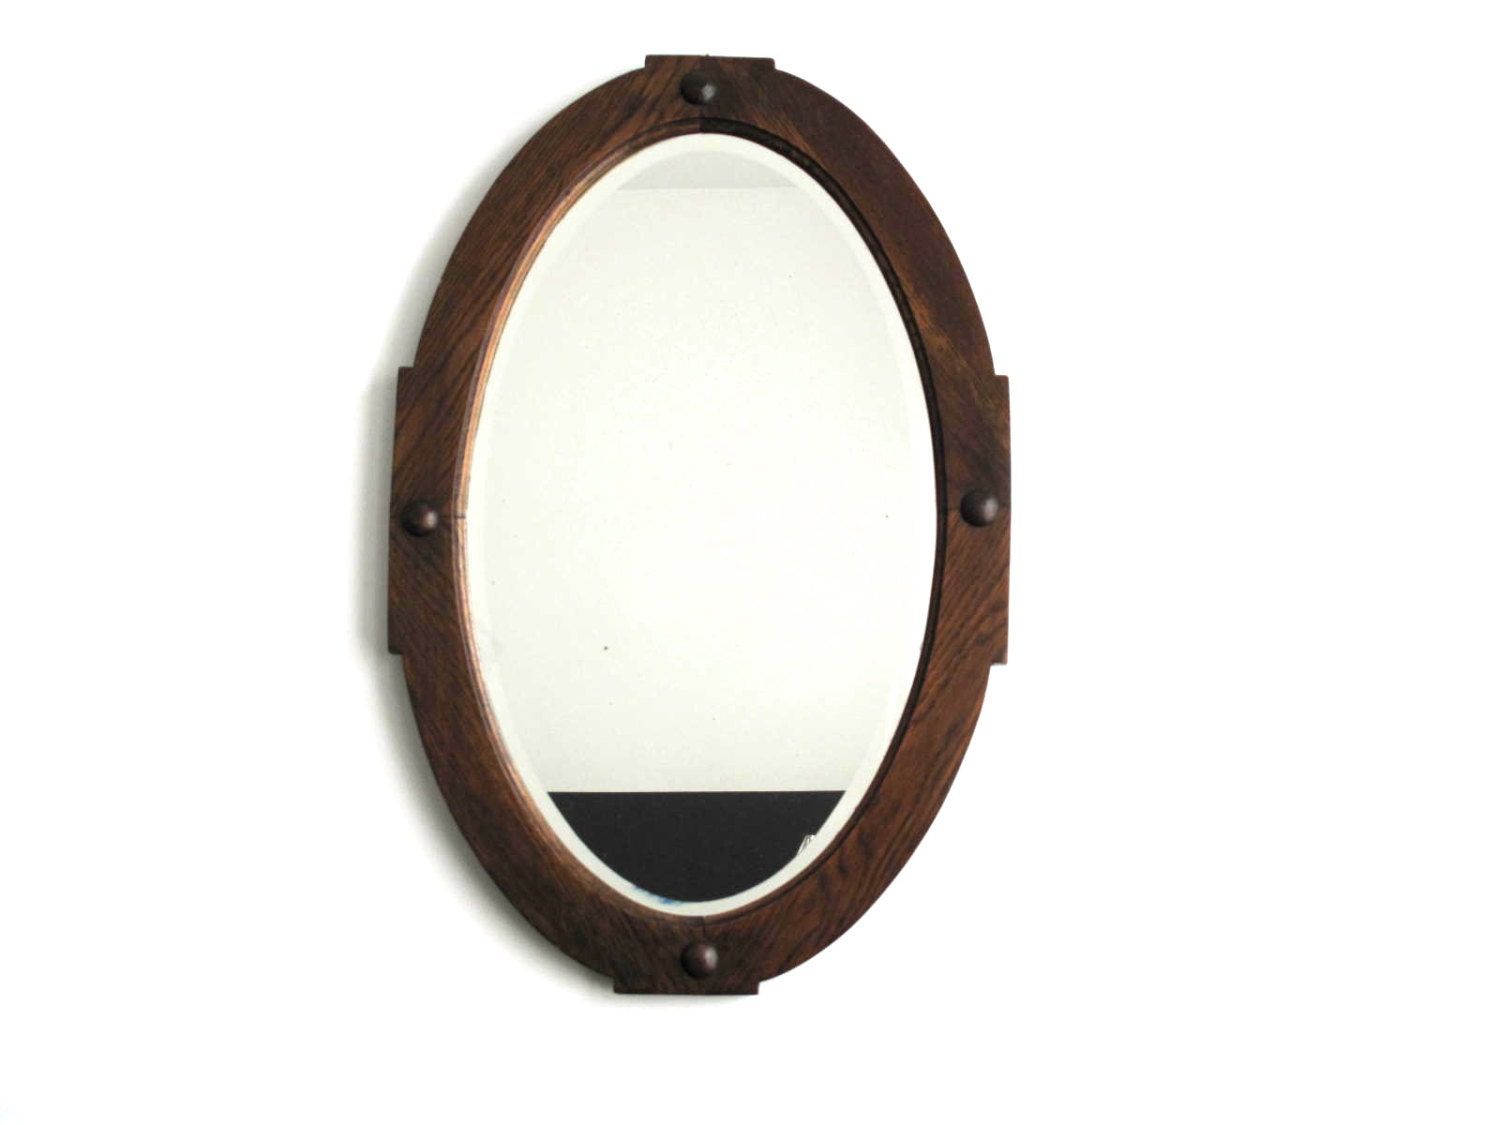 Antique Wood Framed Oval Wall Mirror Vintagesnapshotvintage Intended For Wooden Oval Wall Mirrors (View 3 of 15)